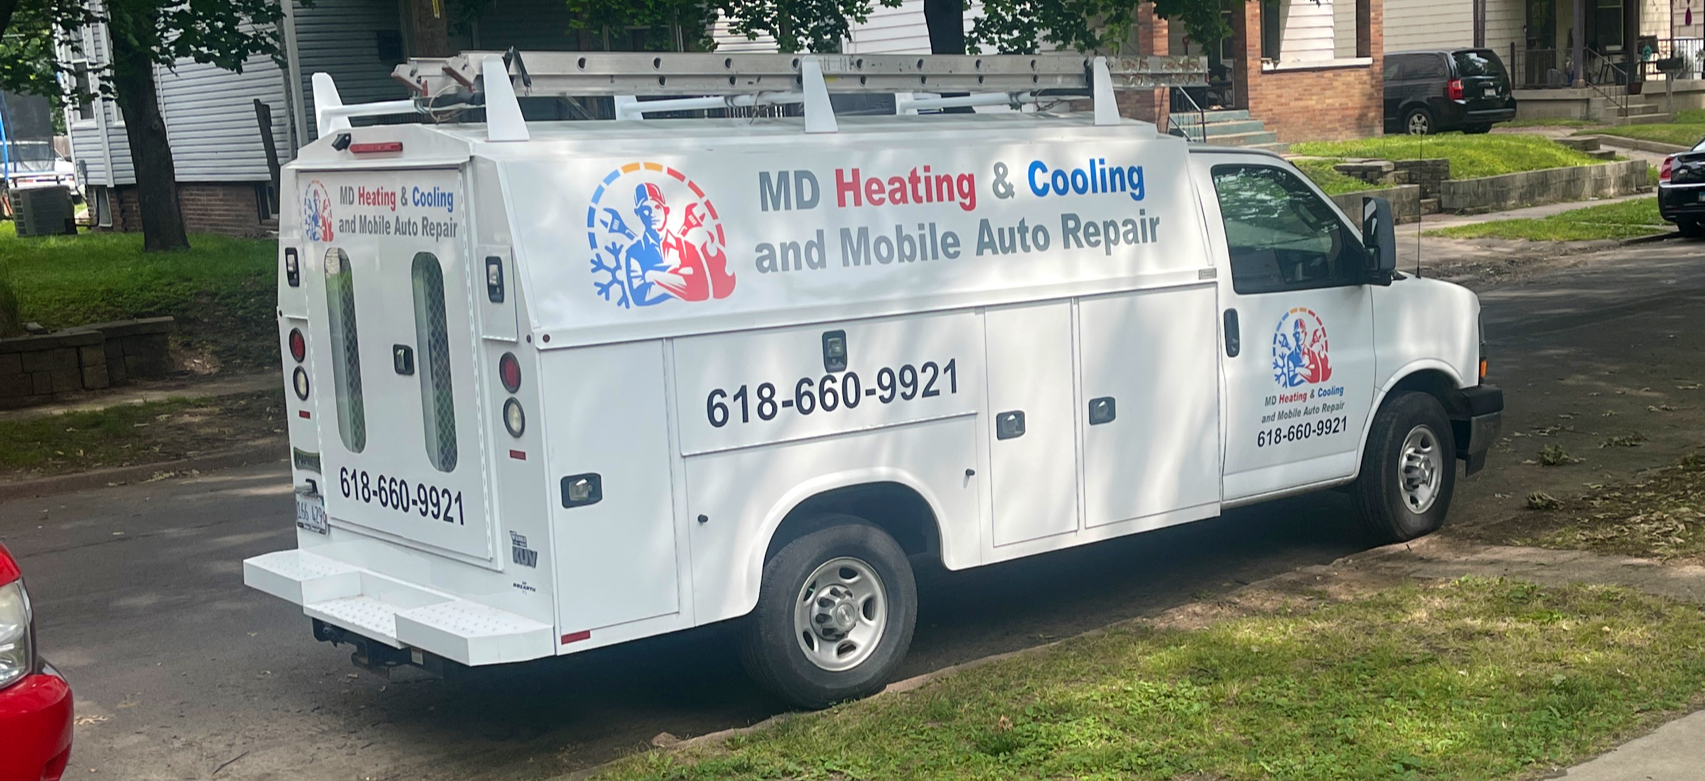 MD residential heating and cooling